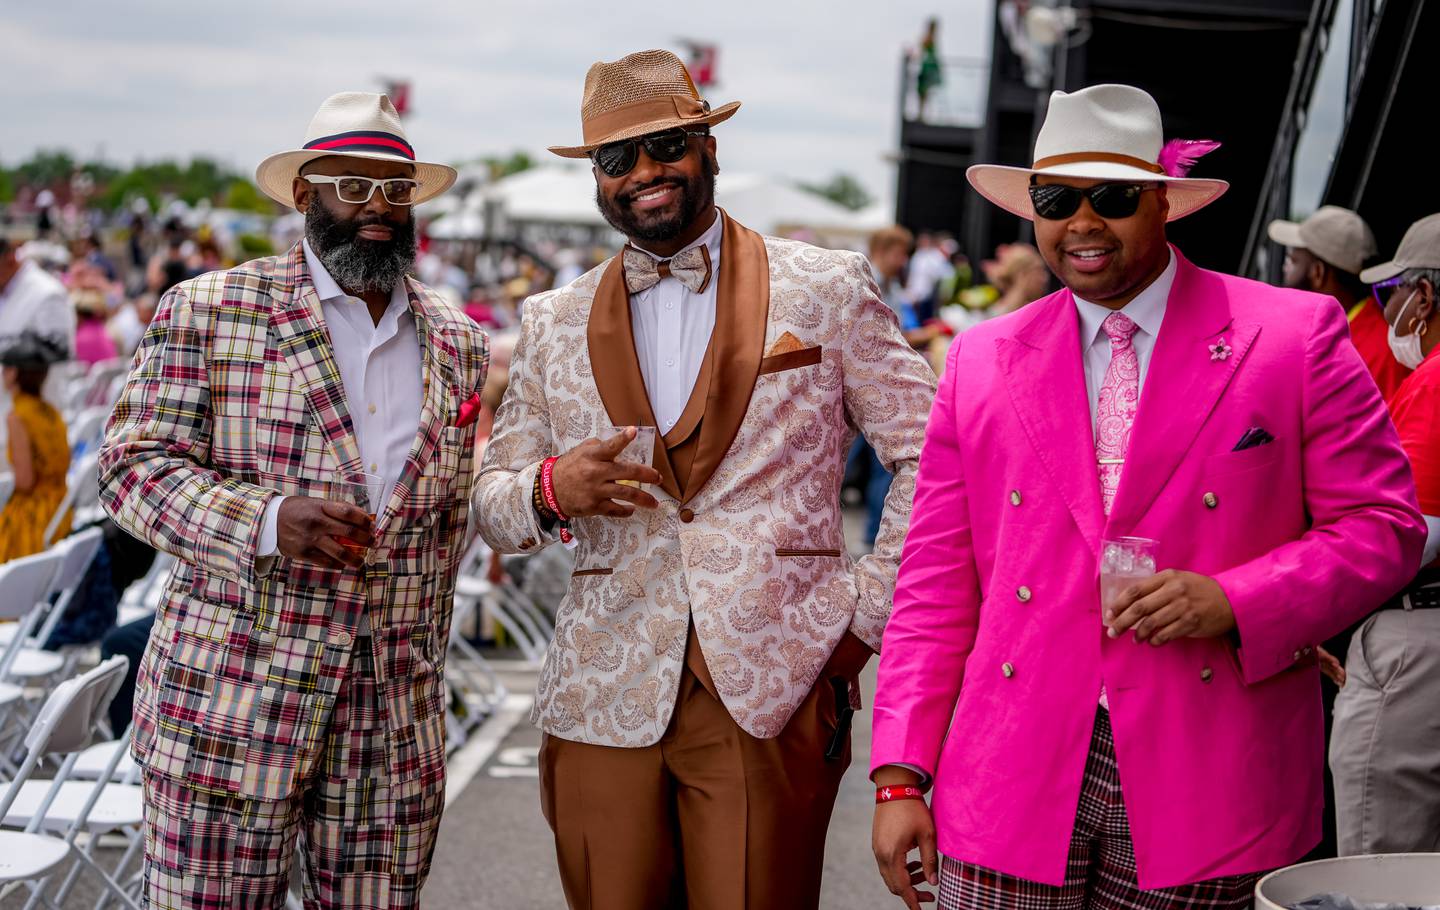 Scenes from around the track on Preakness Day at Pimlico Race Course in Baltimore, Maryland on May 20, 2023.